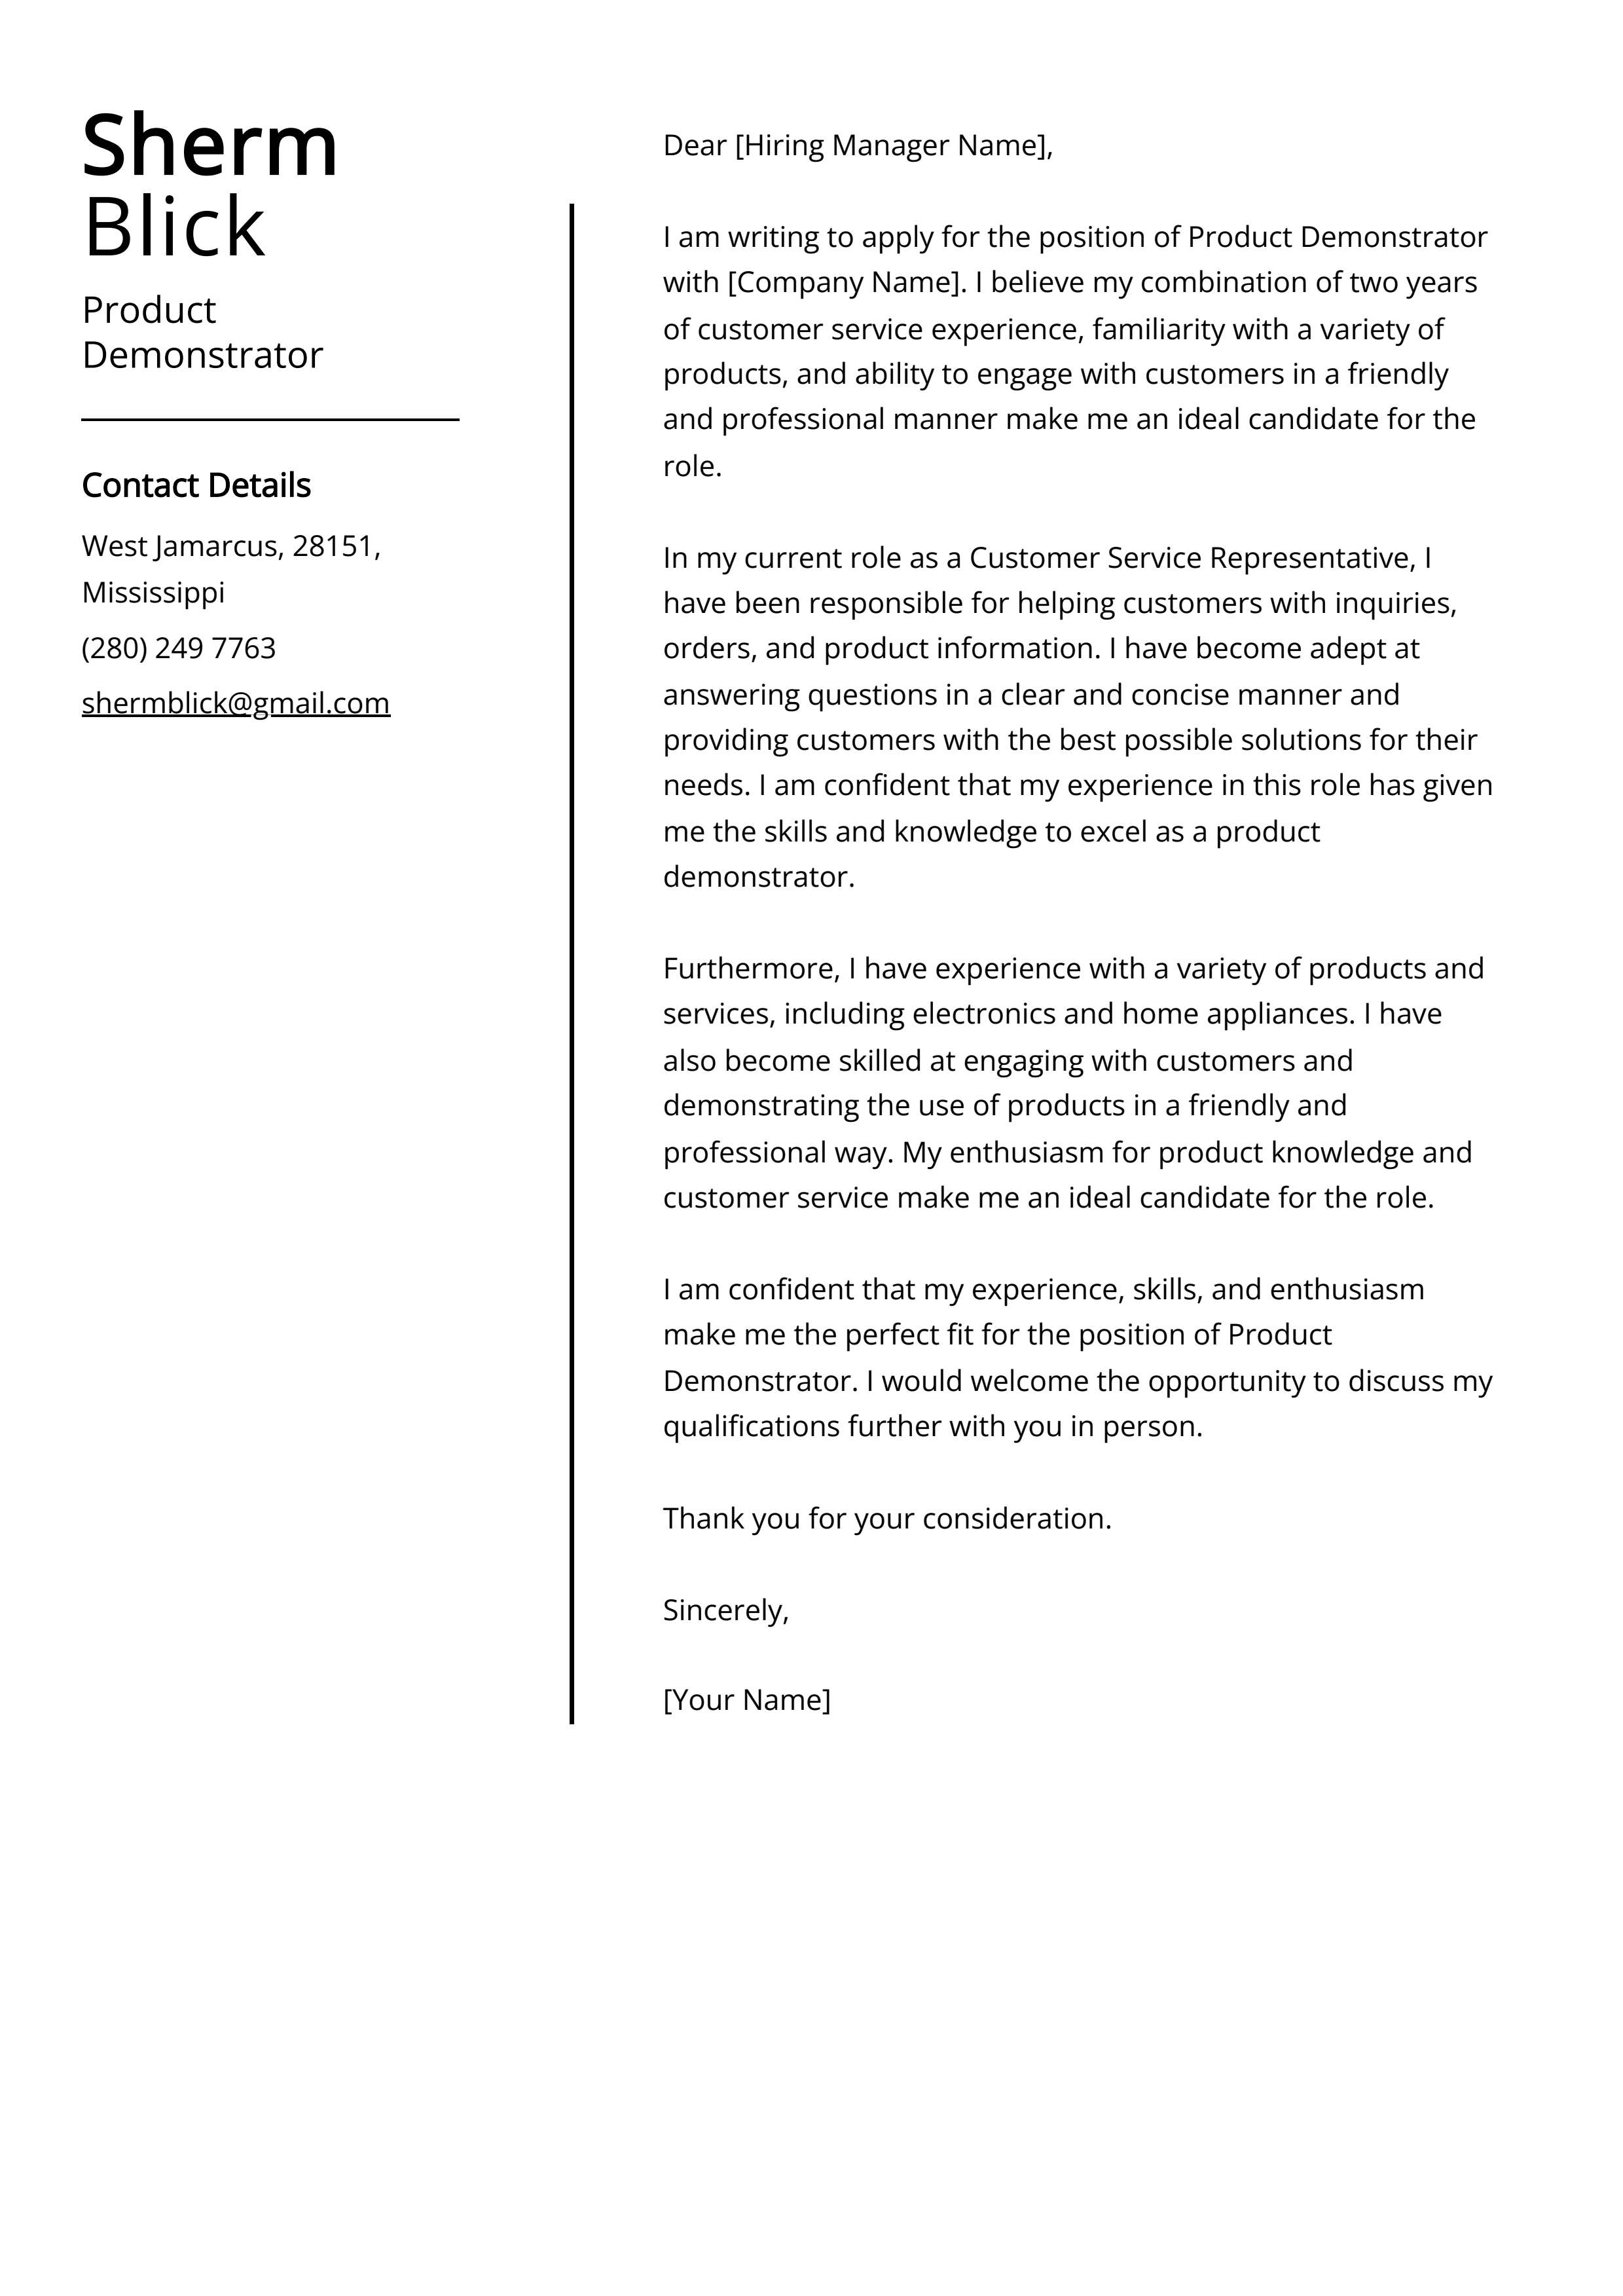 Product Demonstrator Cover Letter Example